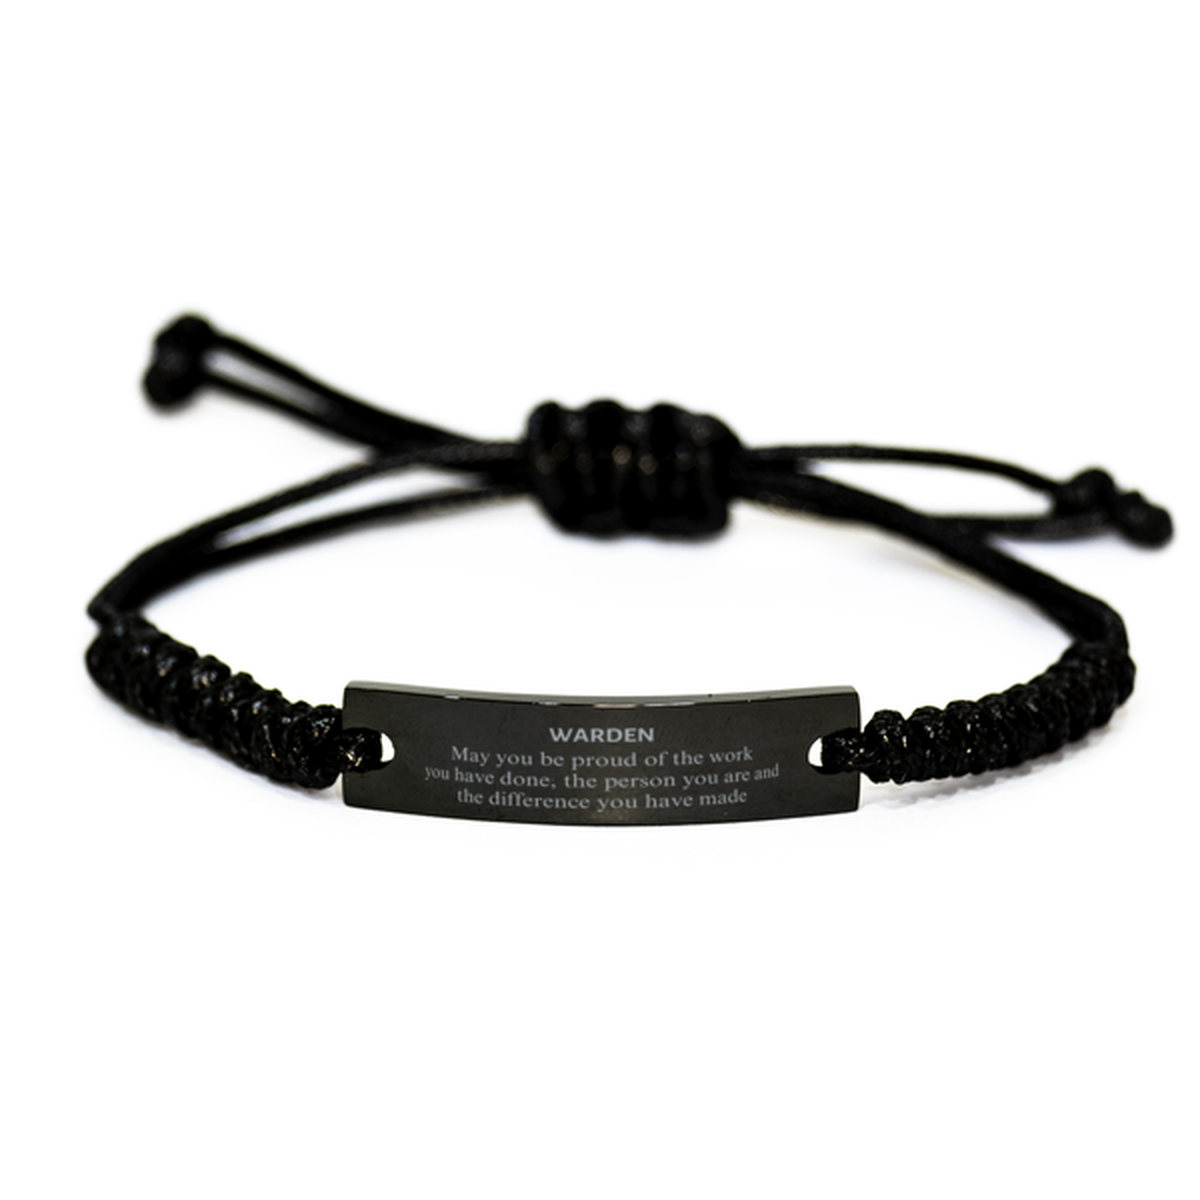 Warden May you be proud of the work you have done, Retirement Warden Black Rope Bracelet for Colleague Appreciation Gifts Amazing for Warden